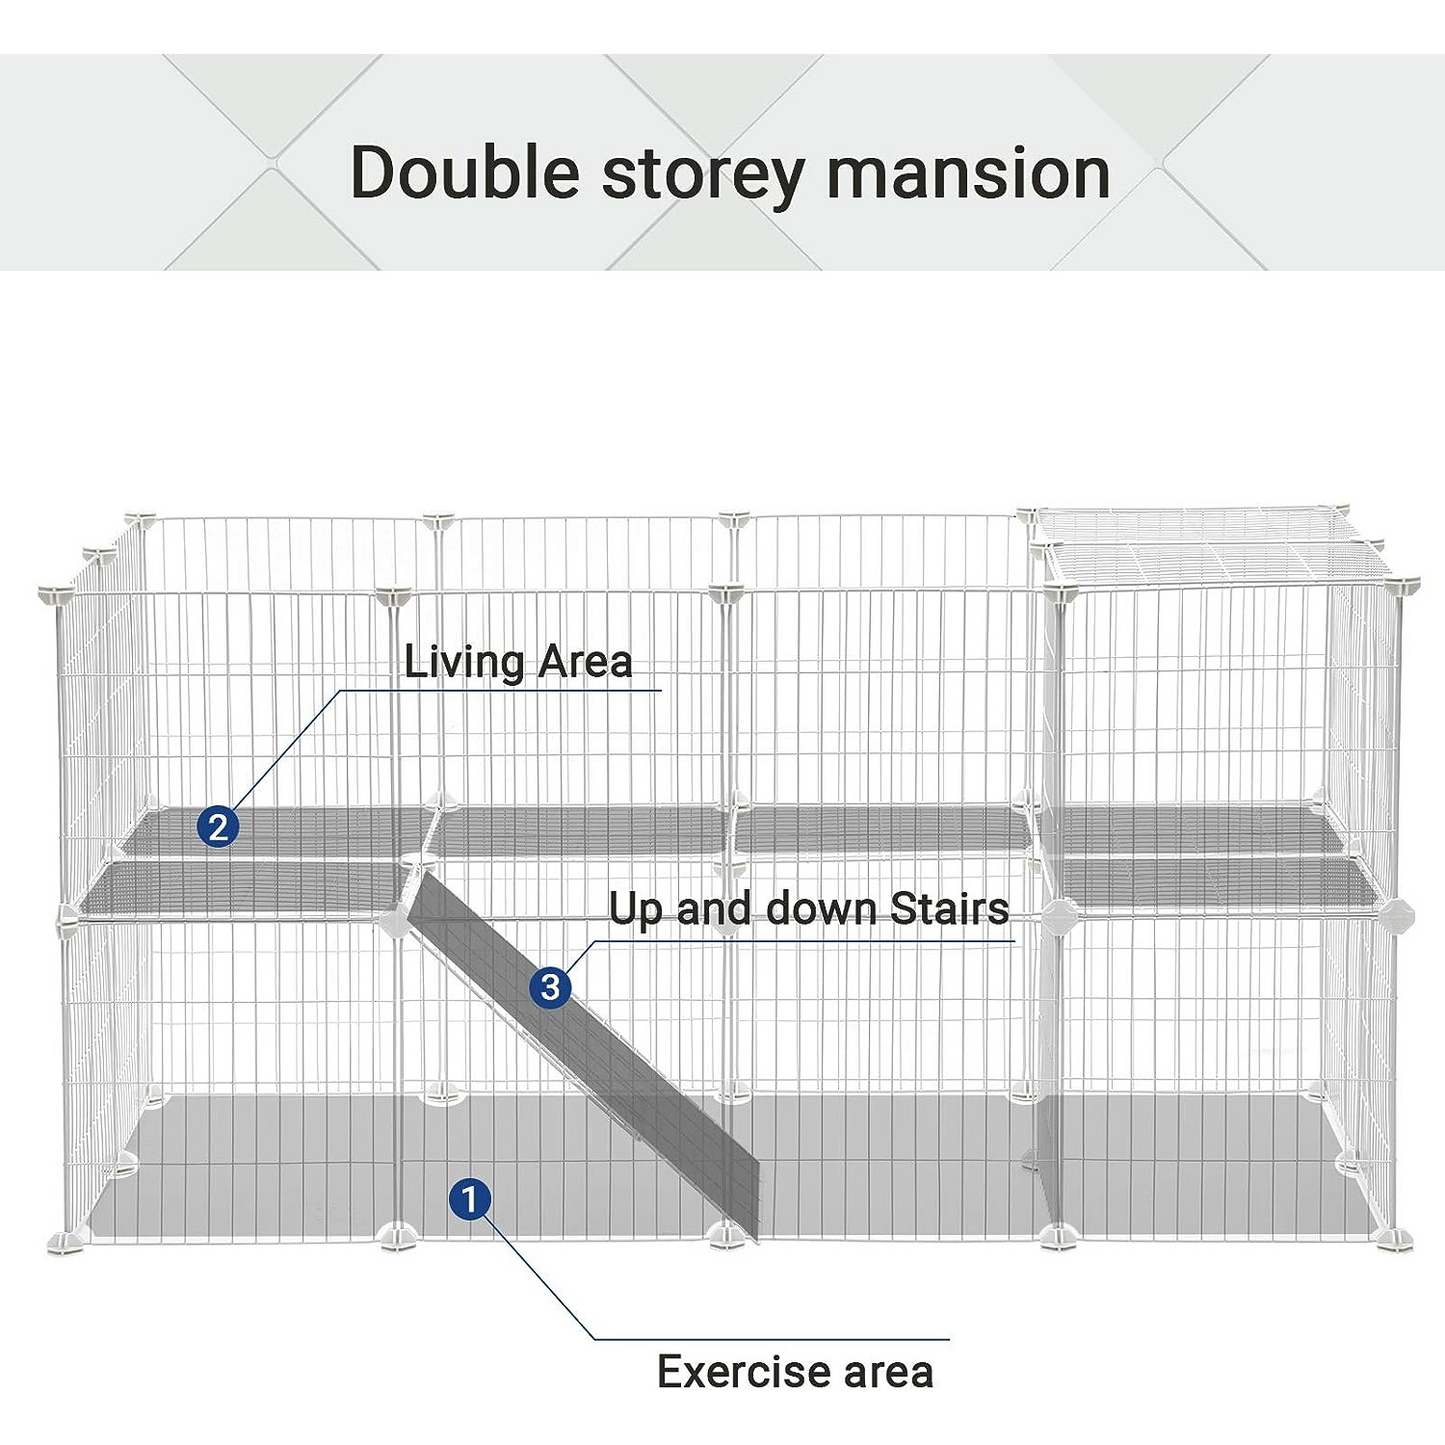 SONGMICS Metal Wire Two-Story Pet Playpen with Zip Ties White